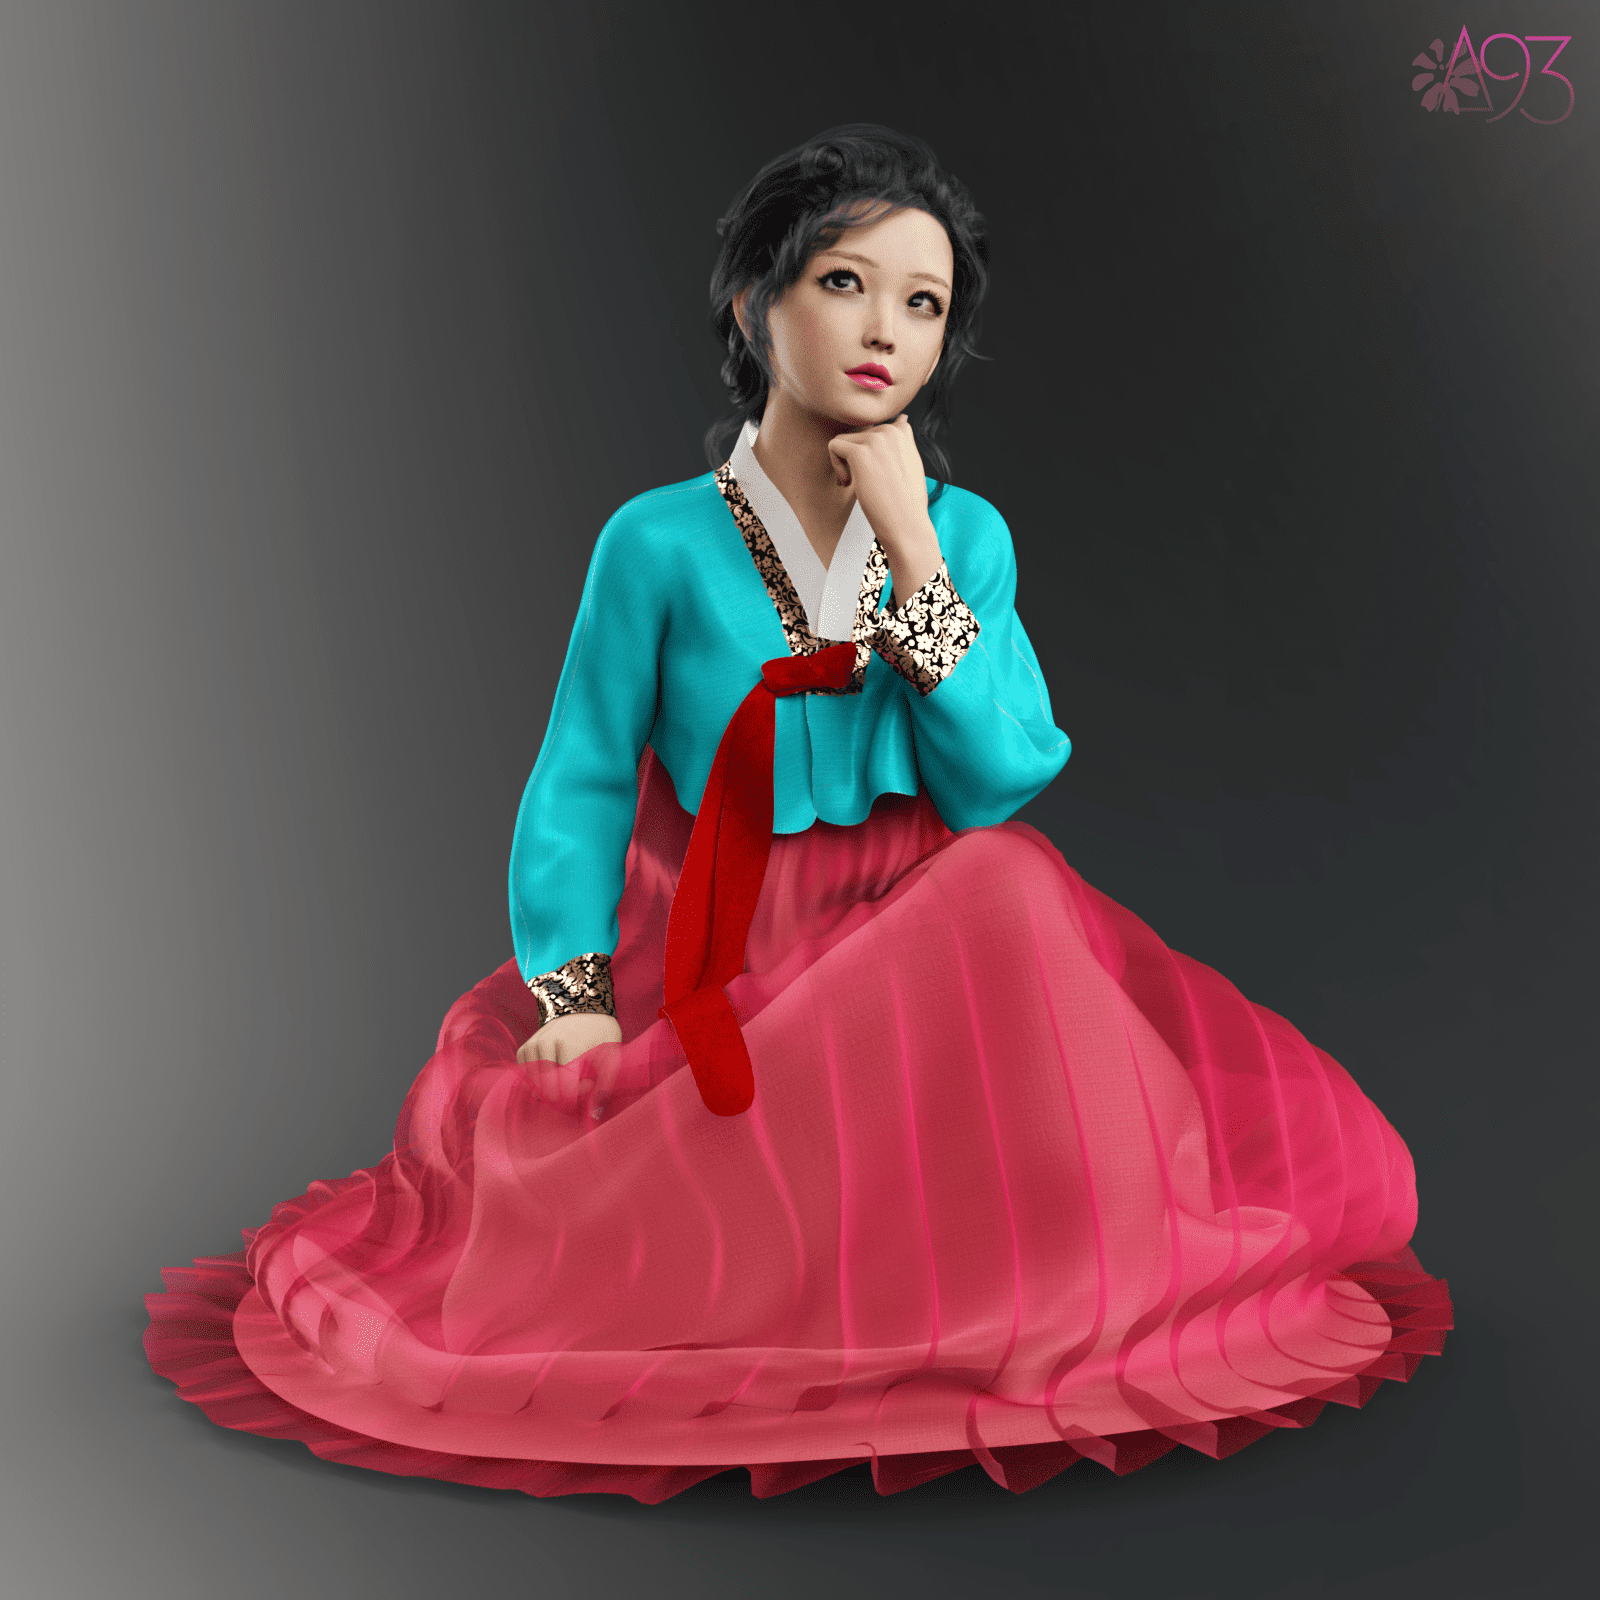 a93 – dForce Hanbok for G8F and G8.1F_DAZ3D下载站